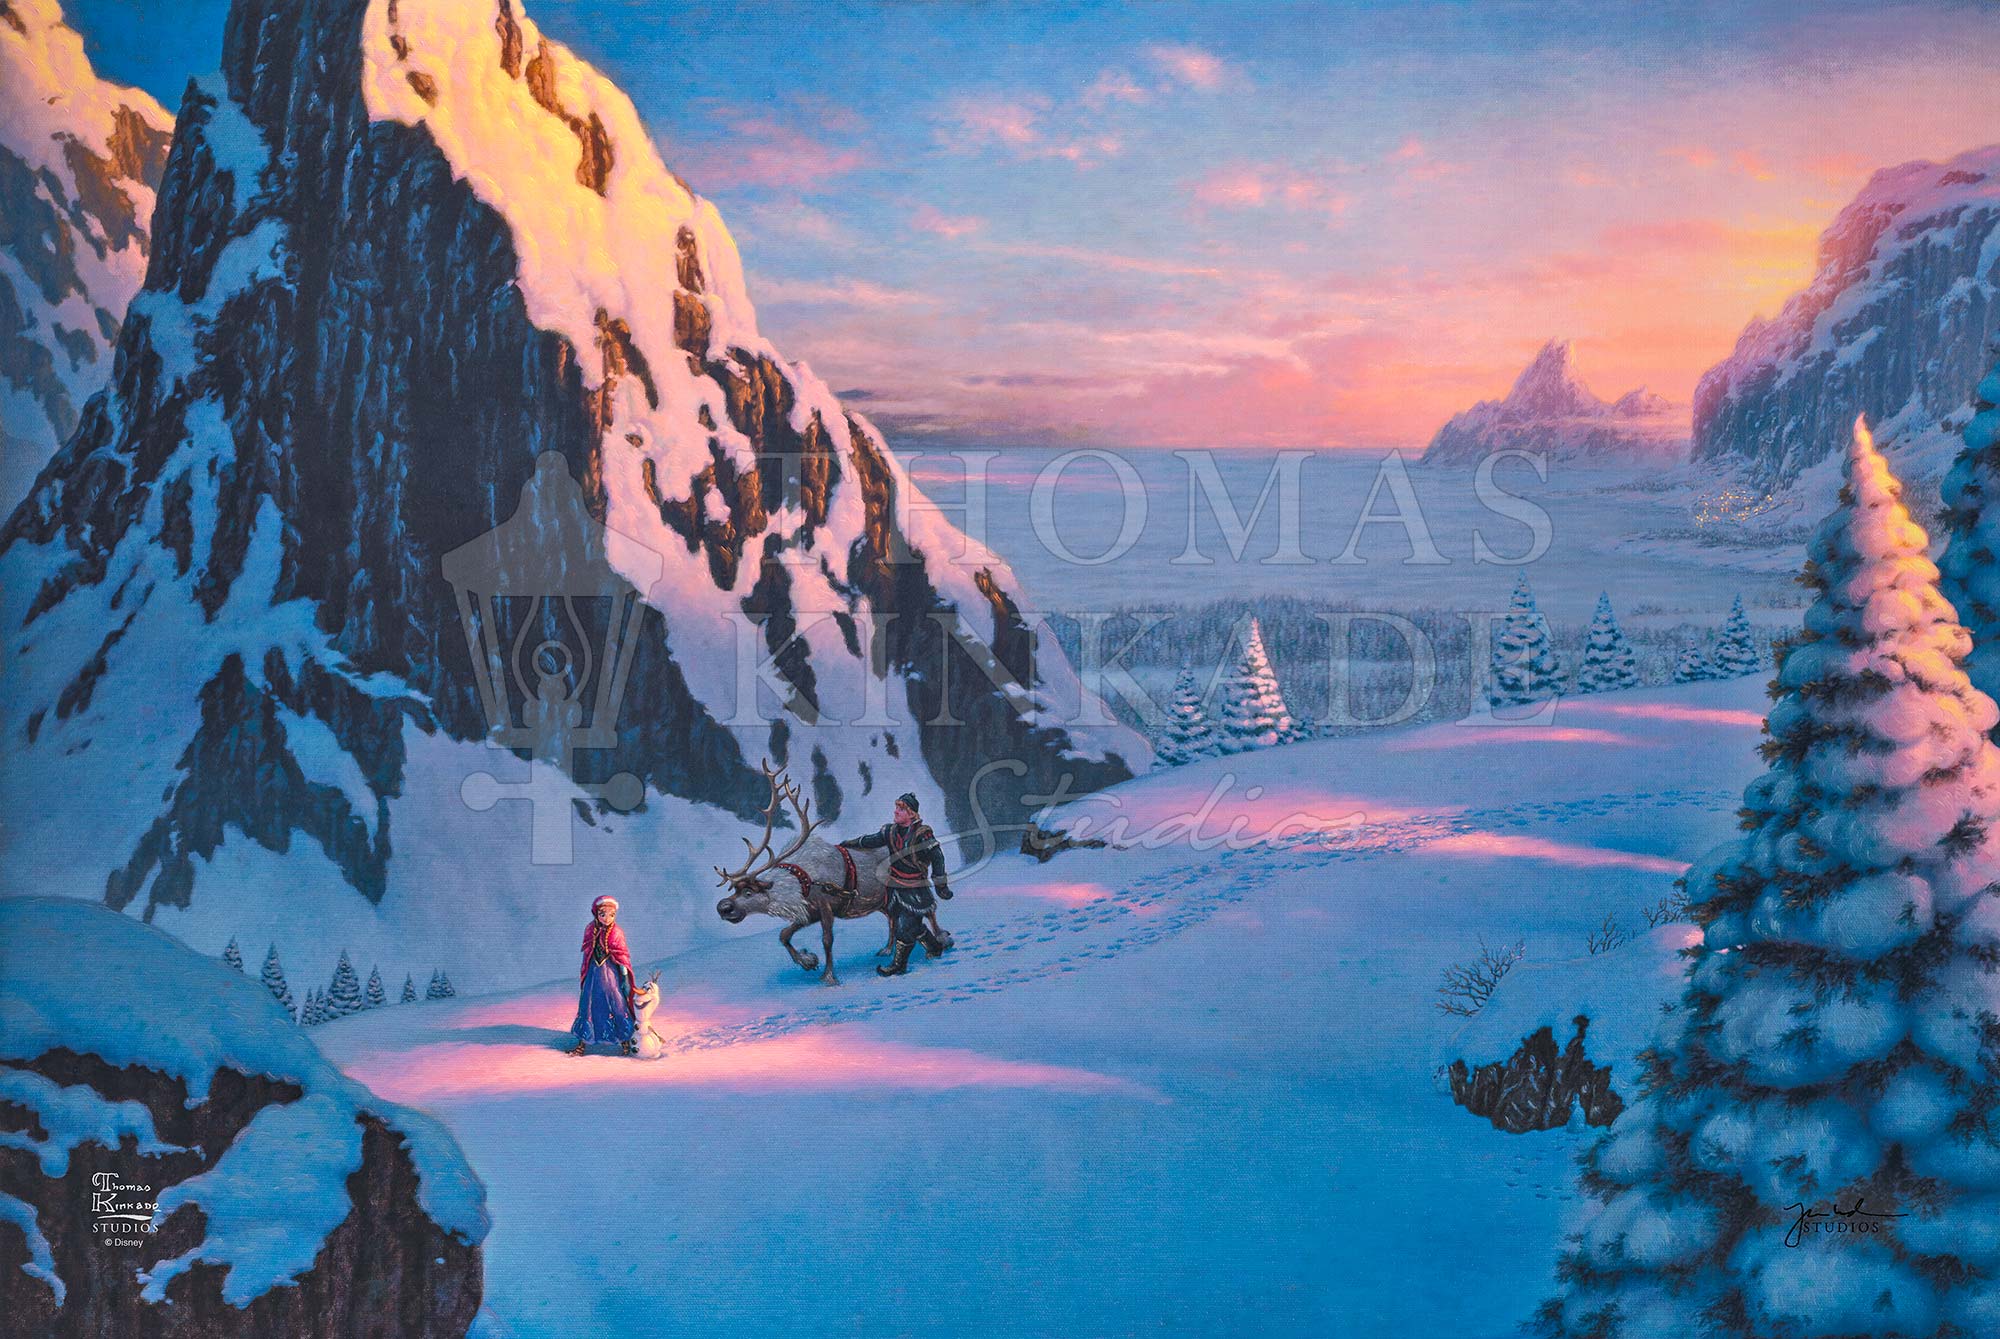 This scene takes Anna, Olaf joined by Kristoff, and his friend Sven on their journey the through the snowy slopes of Alpine.